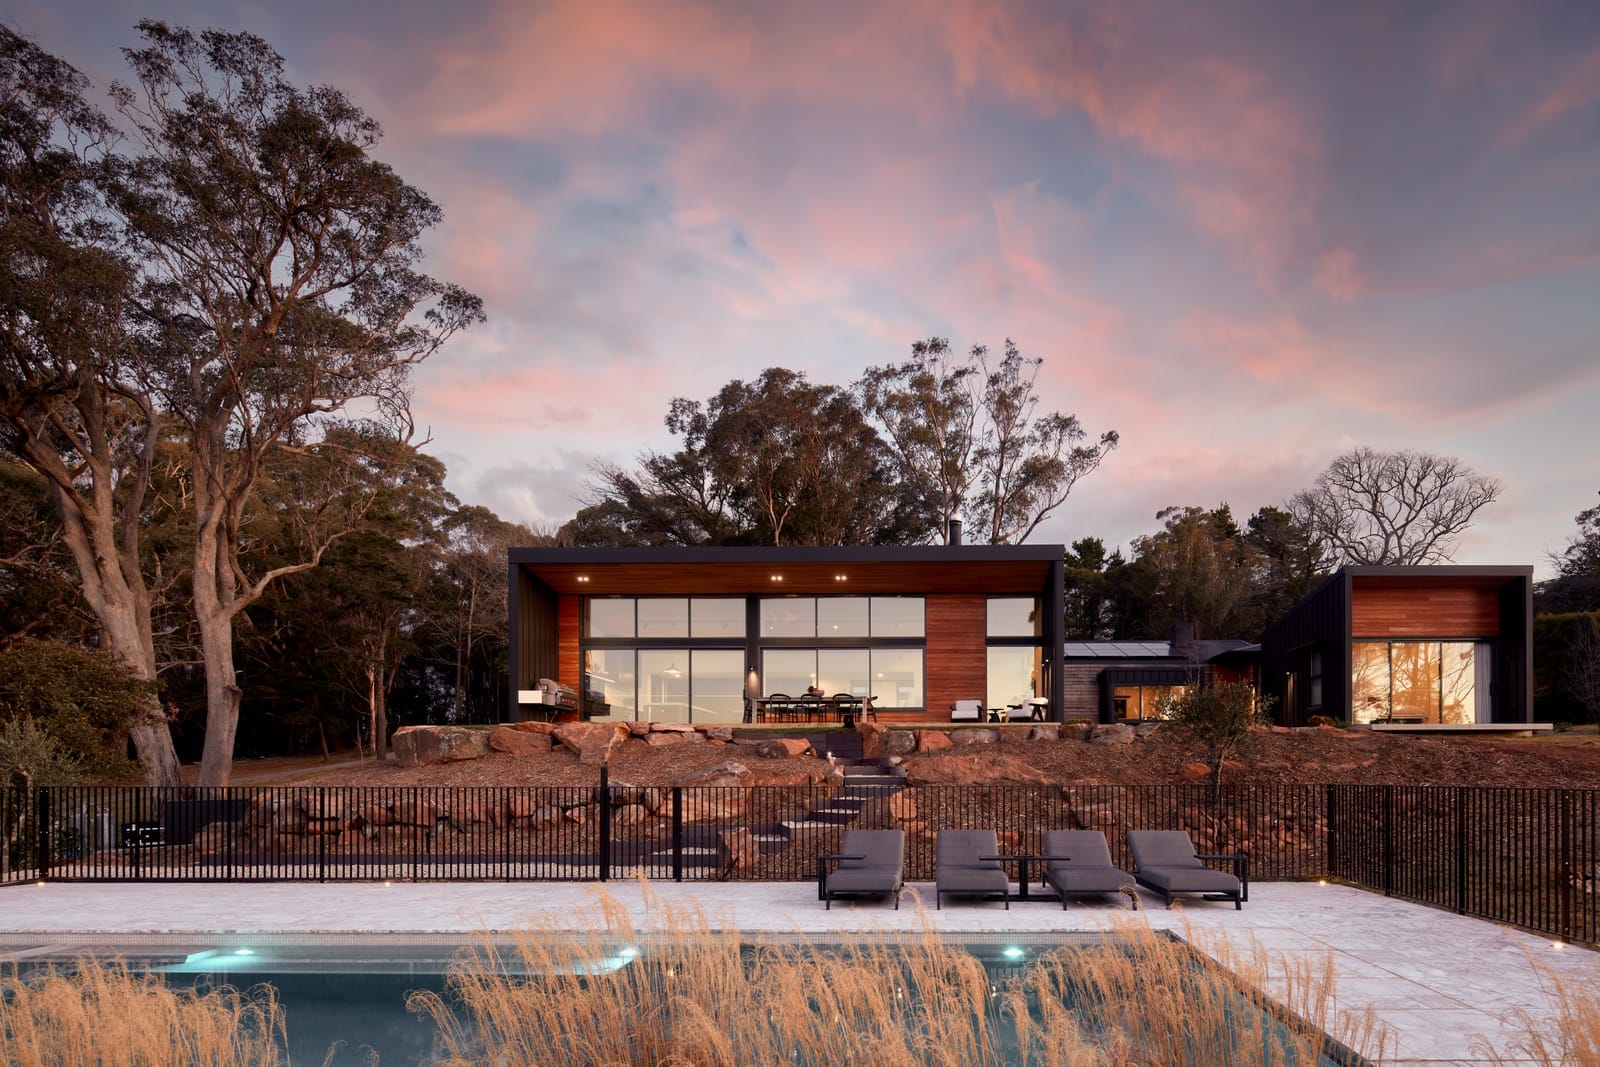 House Woodland by AO Design Studio. he image presents a twilight view of House Woodland by AD Design Studio, with the interior lights casting a warm glow against the dusky sky. The modern house has a flat roof and large windows that showcase the interior. The outdoor area includes a patio with a dining set and a pool that reflects the evening sky.